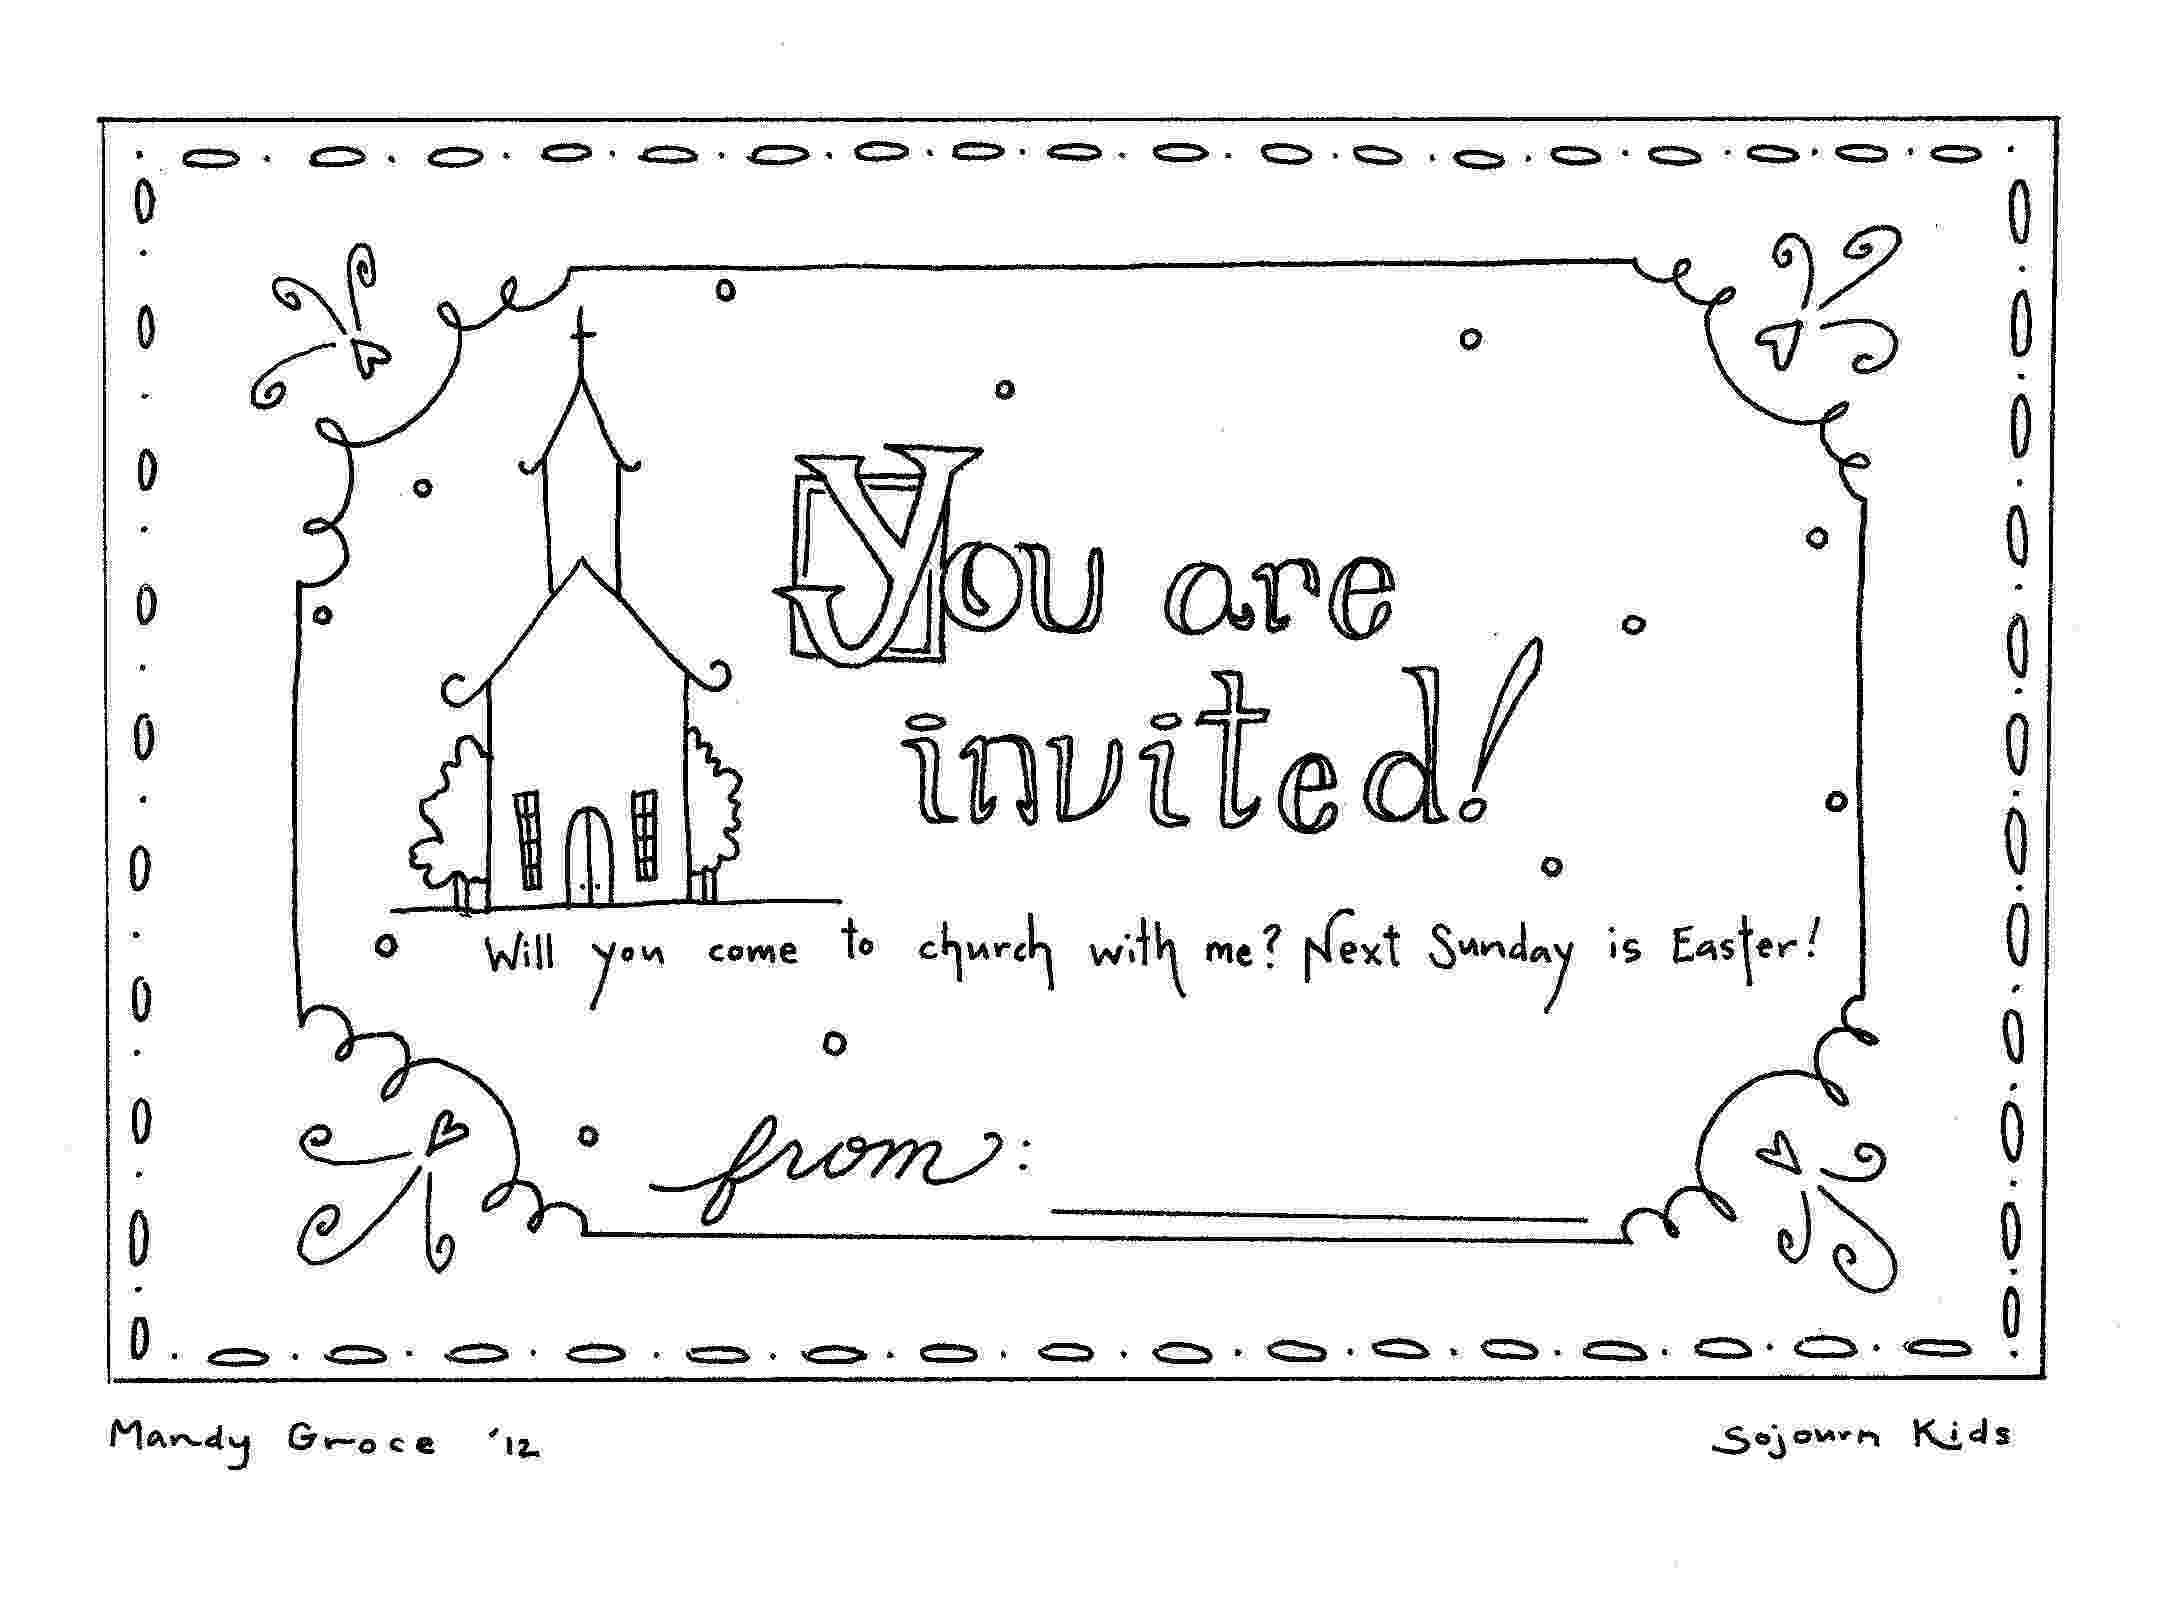 easter coloring pages for childrens church easter sunday invitation coloring pages sunday school church for pages childrens coloring easter 